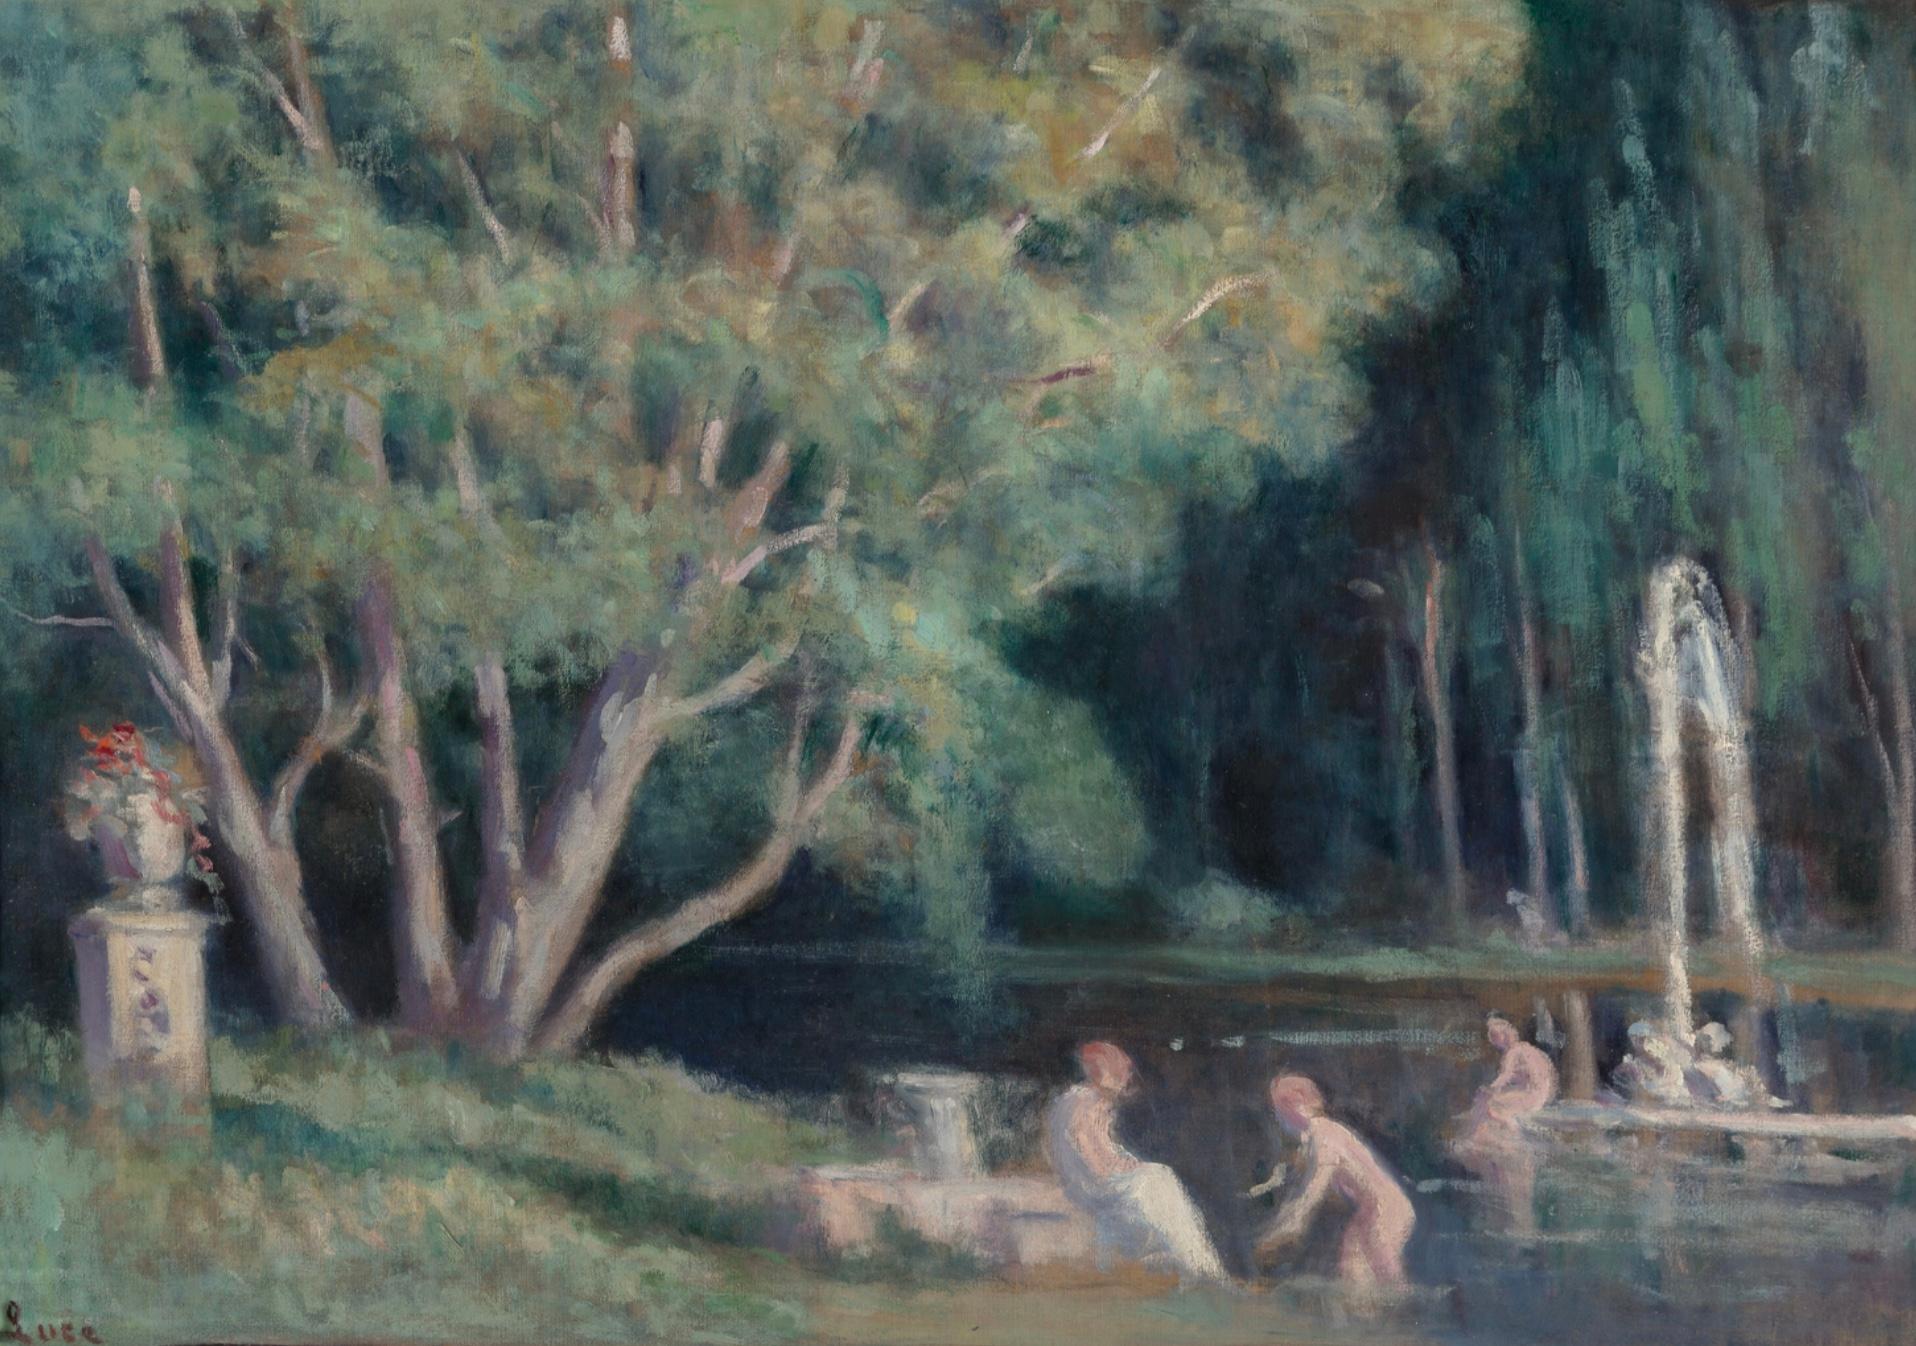 Maximilien Luce (French, 1858-1941)

Les baigneurs au jet d'eau. Swimmers At The Fountain. A stunning Art Nouveau, Art Deco Pathetic style evening scene of nude swimmers at a pond with a water fountain in the moonlight. The greens and lighting are